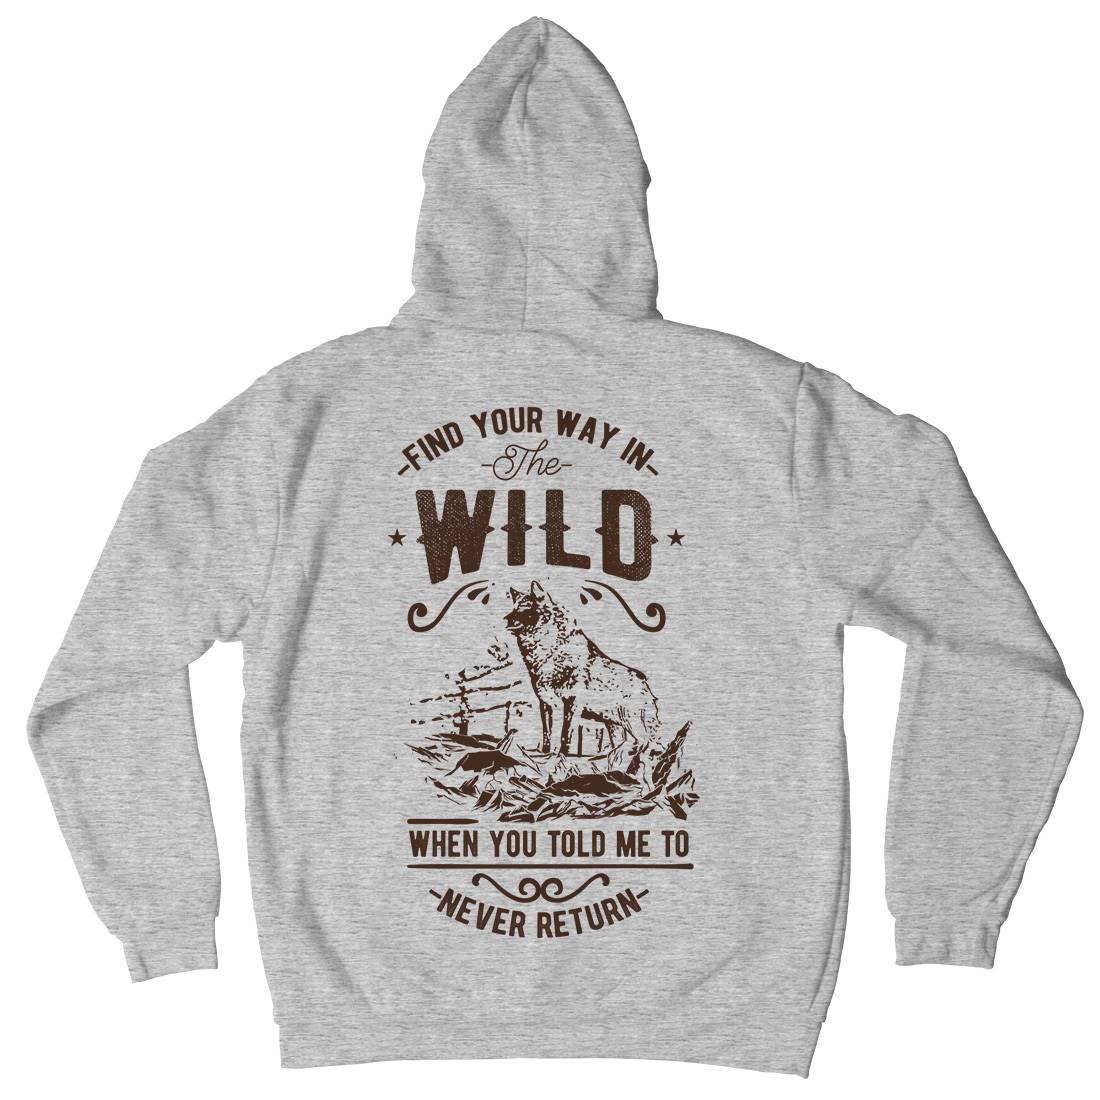 Find Your Way In The Wild Mens Hoodie With Pocket Nature C932